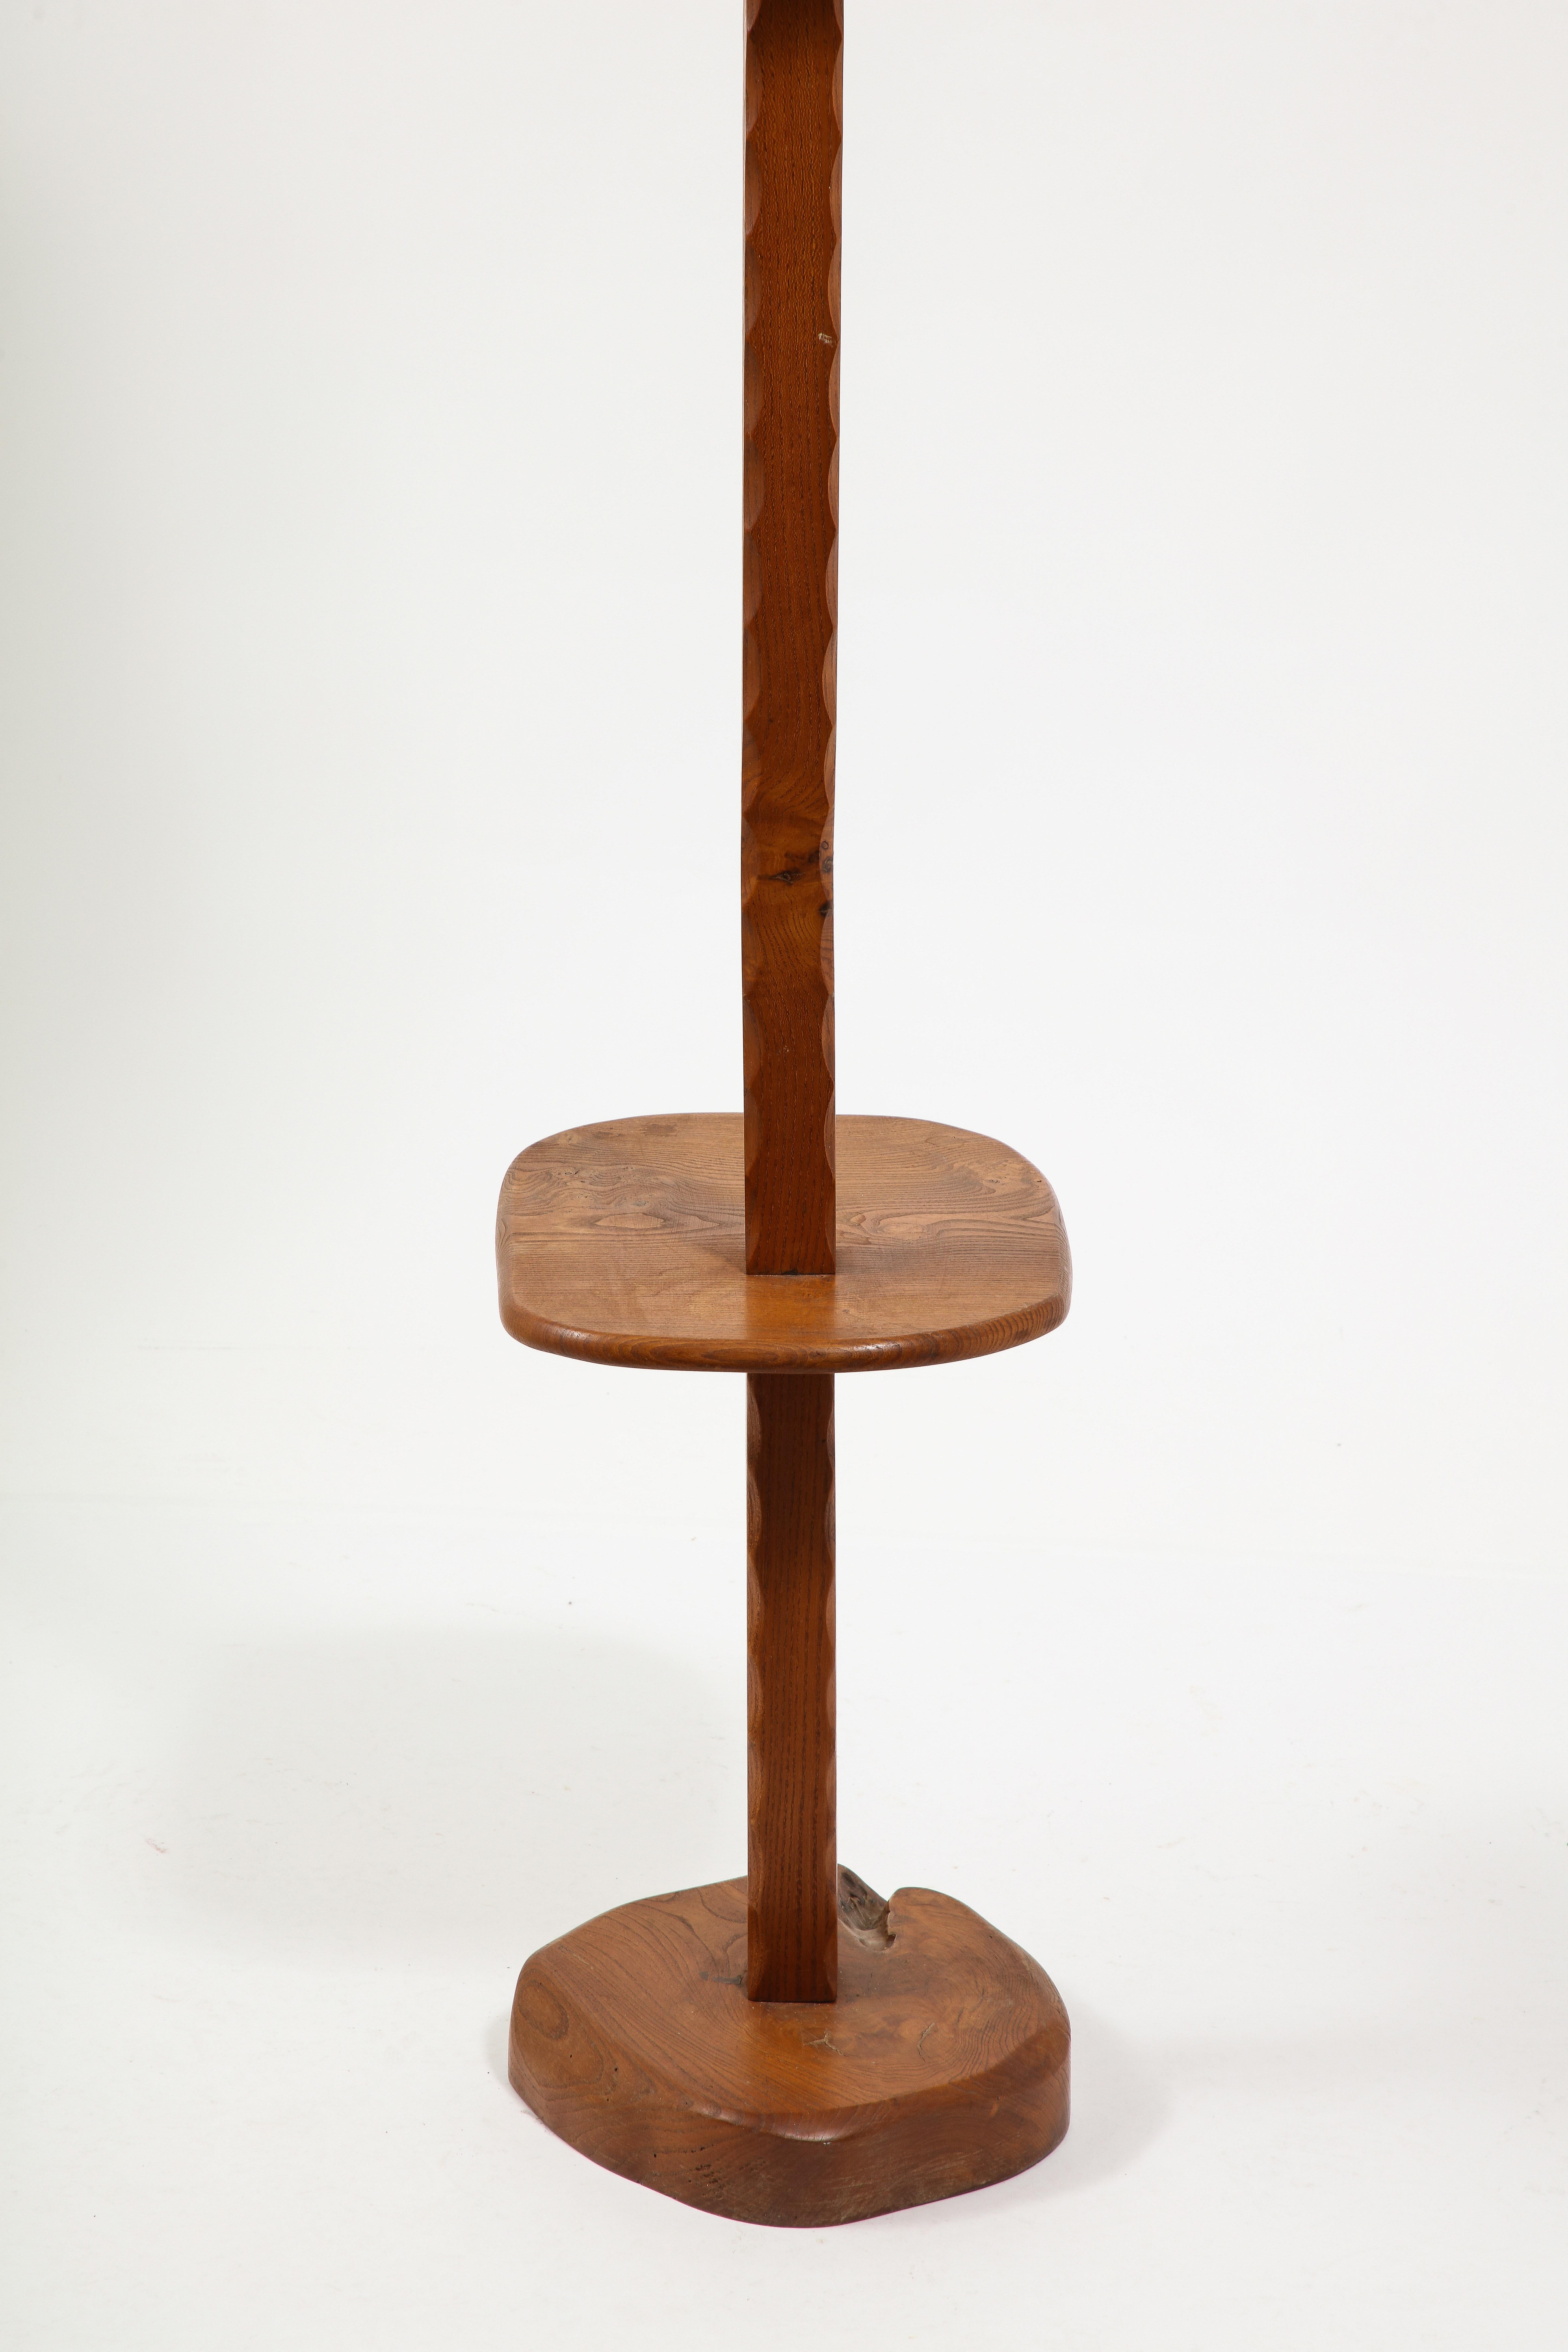 Solid Elm Floor Lamp With Shelf, France 1950's For Sale 5